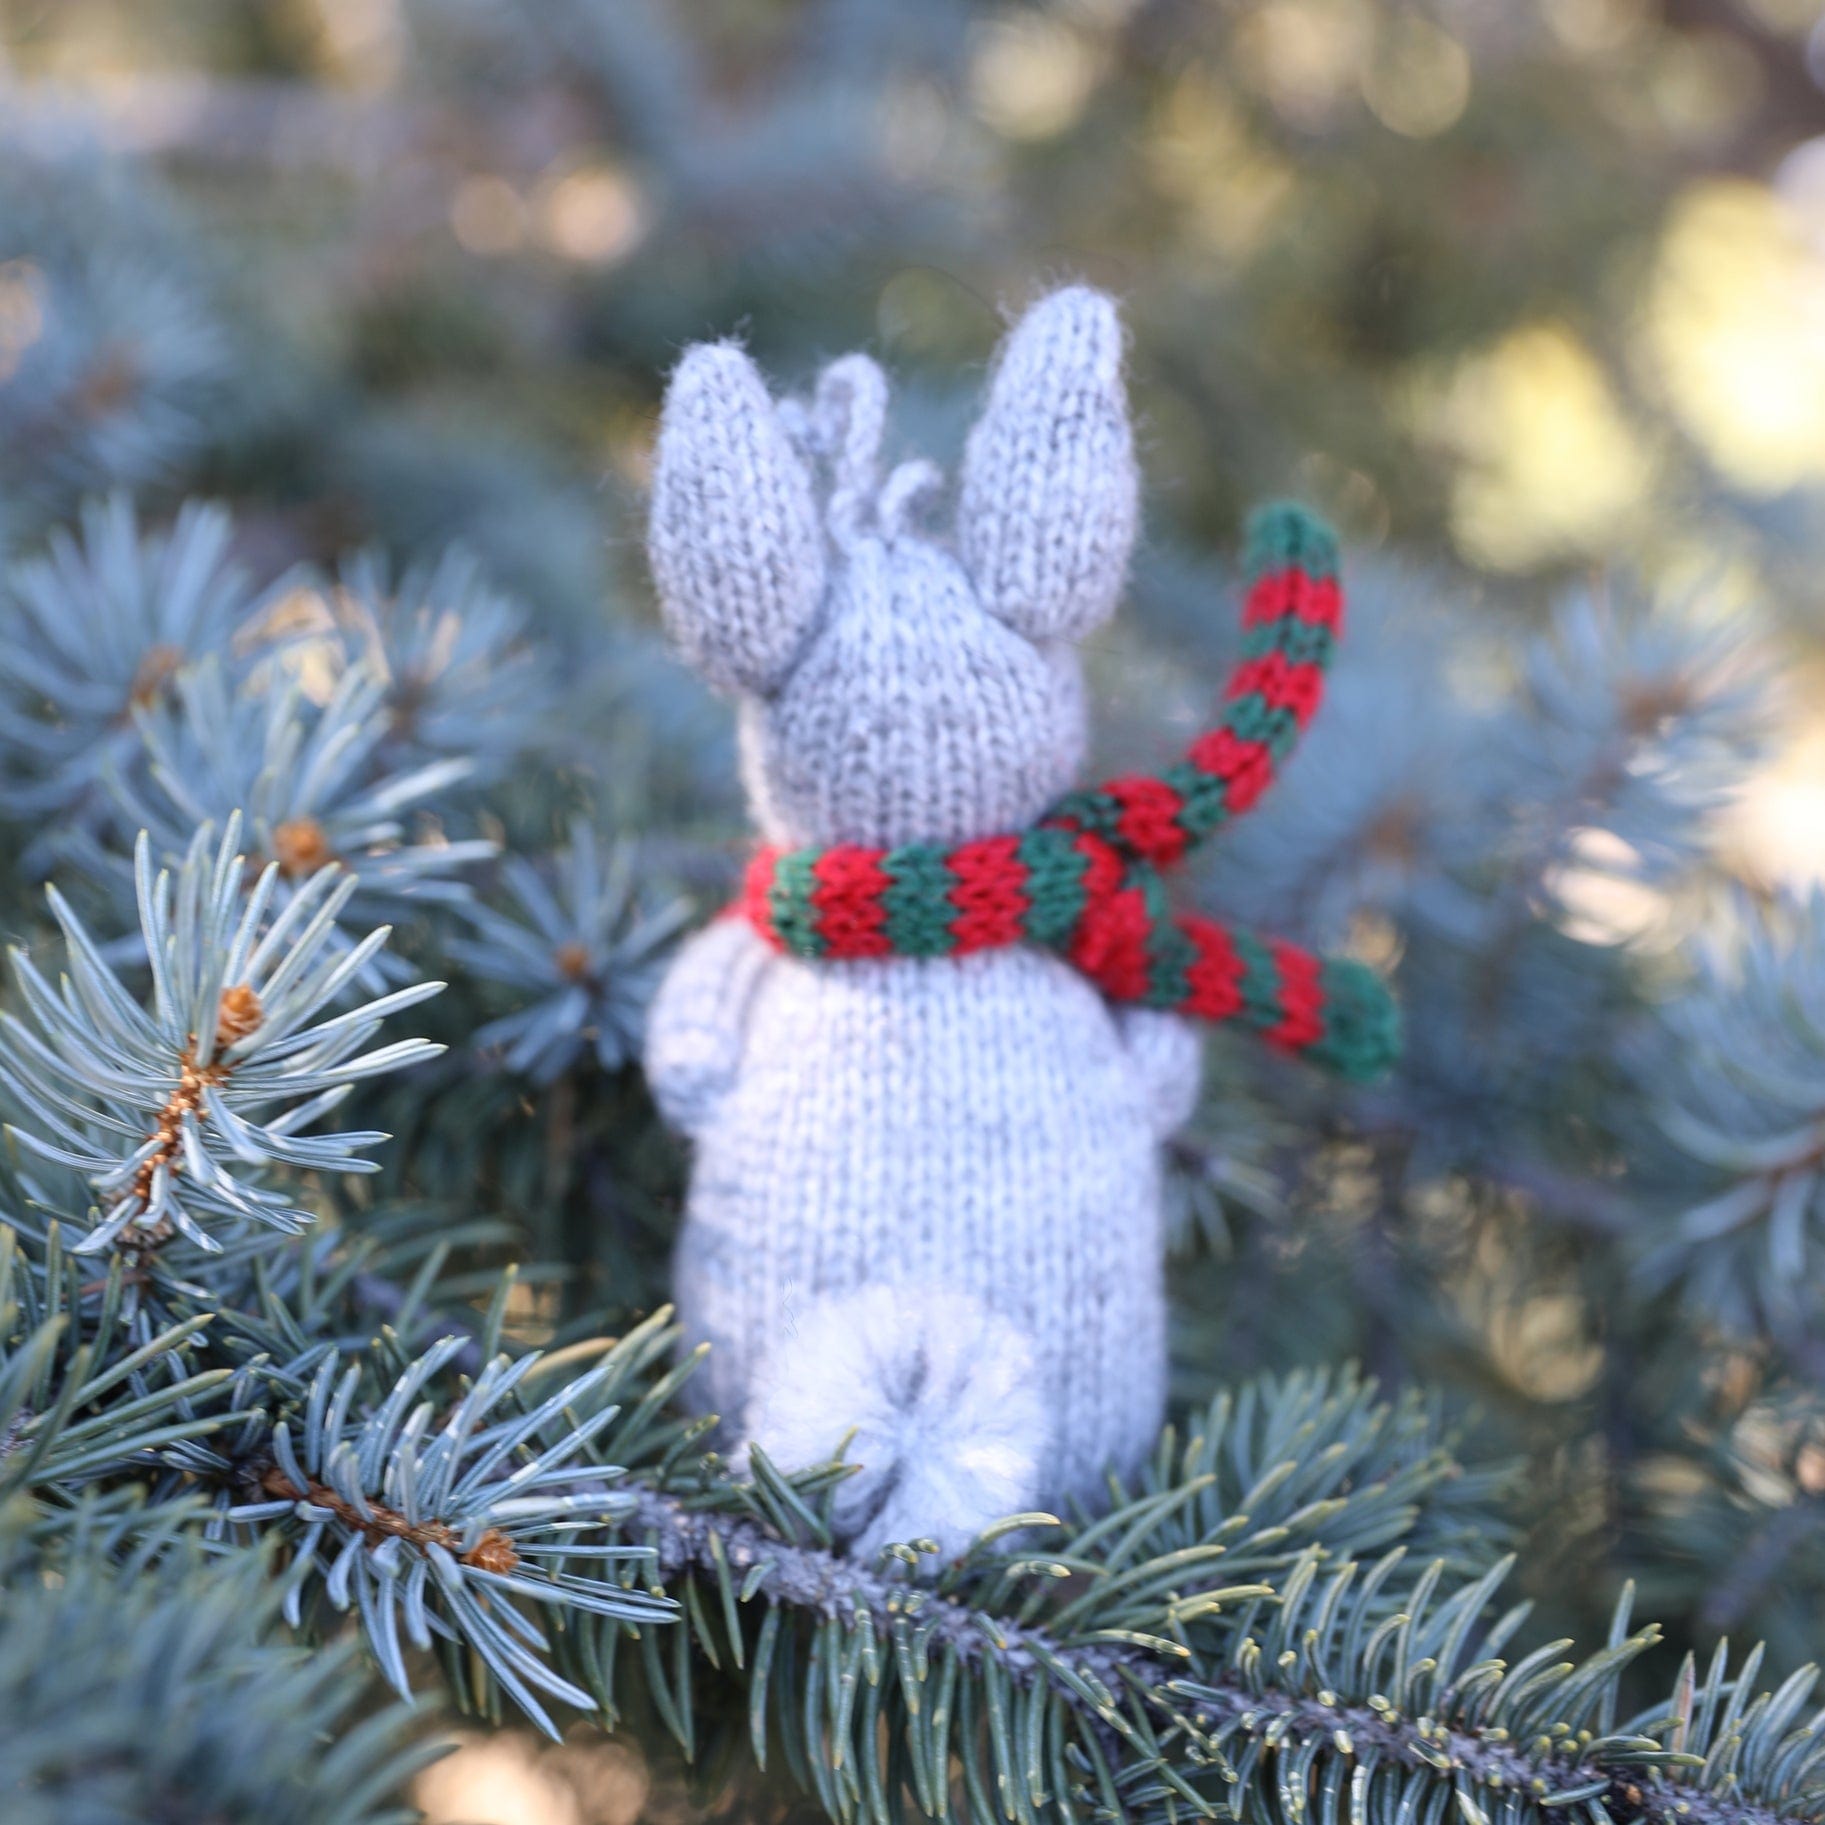 Bunny with Cocoa Handmade Ornament - The Pink Pigs, A Compassionate Boutique